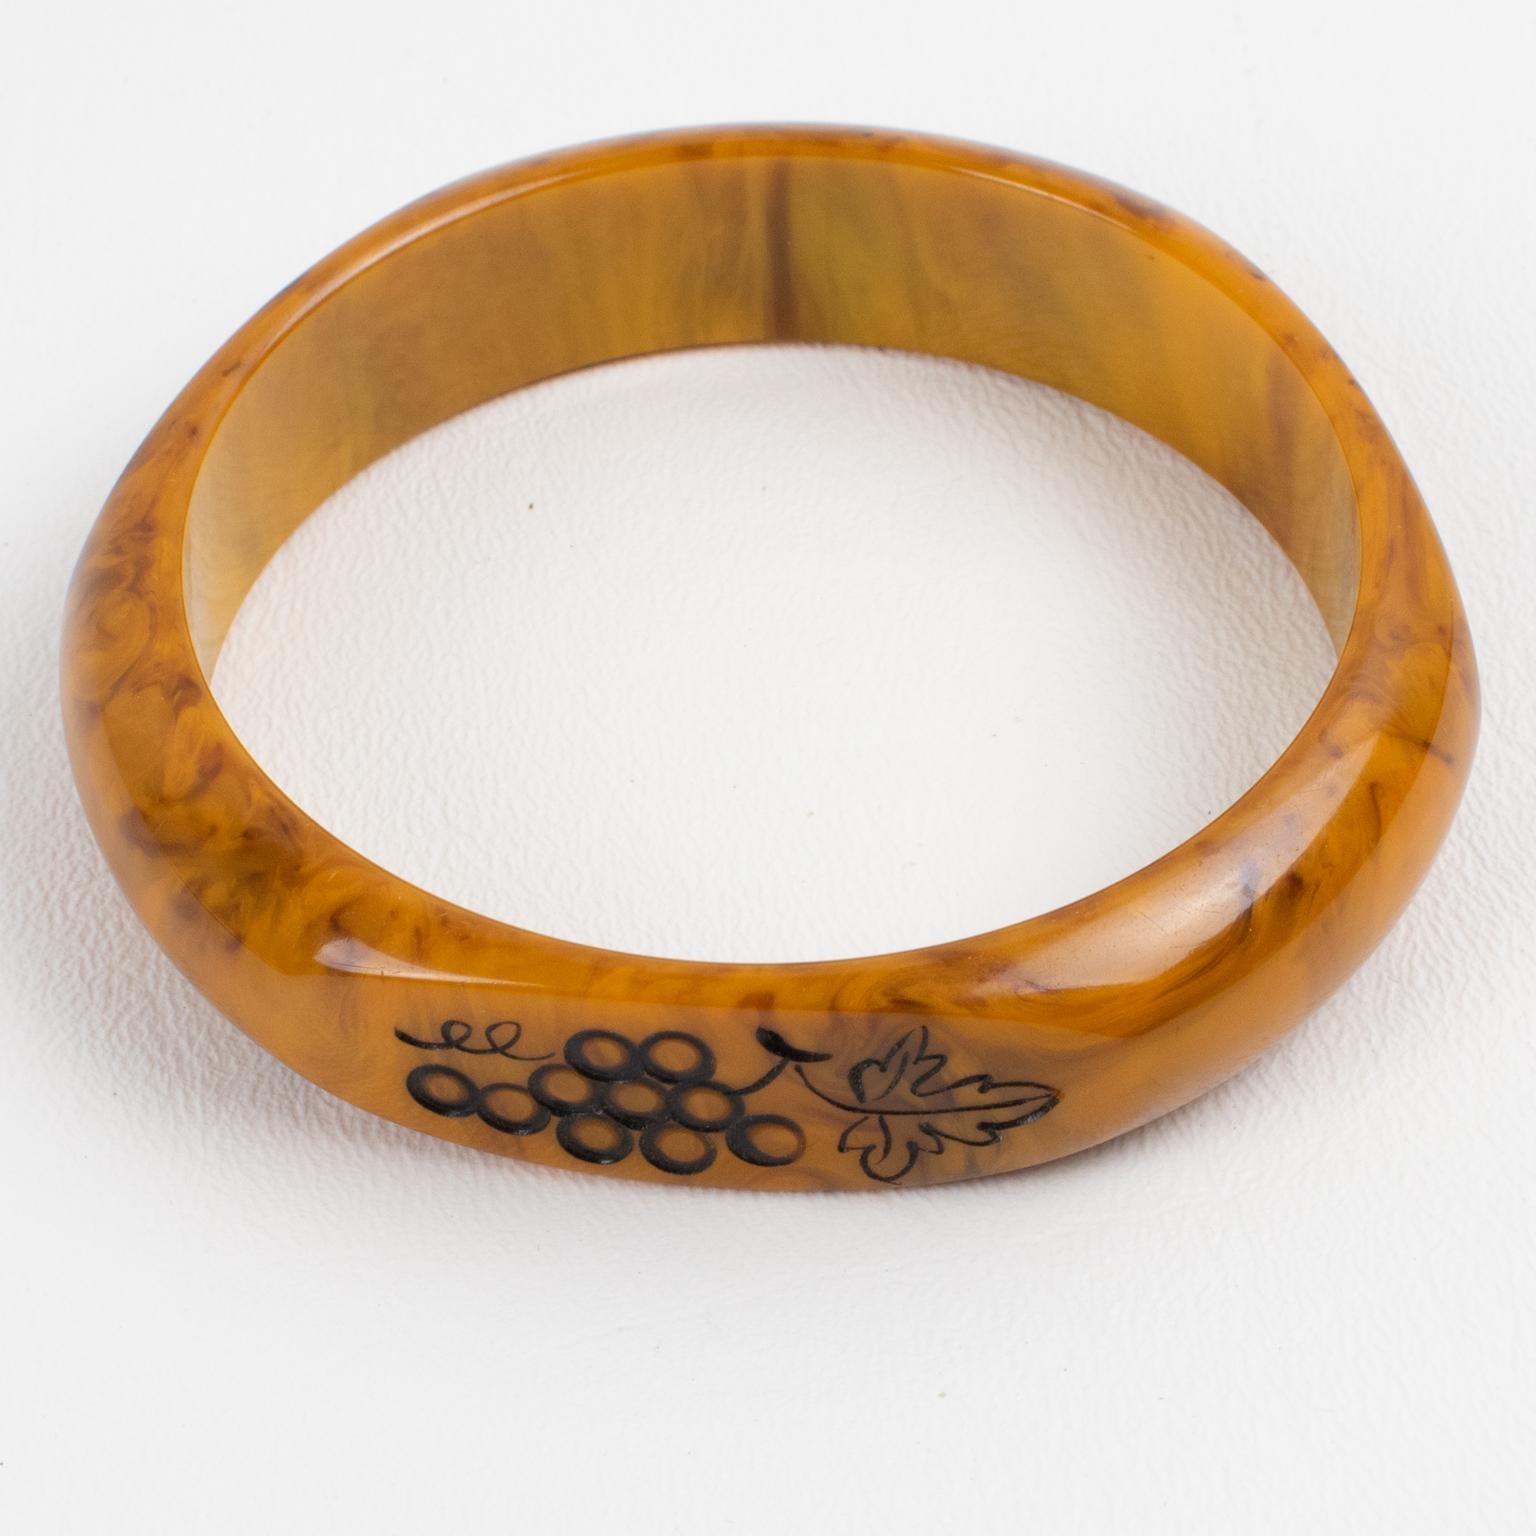 This stunning Mississippi swamp marble Bakelite carved bracelet bangle features a domed shape with three flat areas and carved designs. The design boasts bunches of grapes with black contrast. Intense gold butterscotch marble tone with black-brown